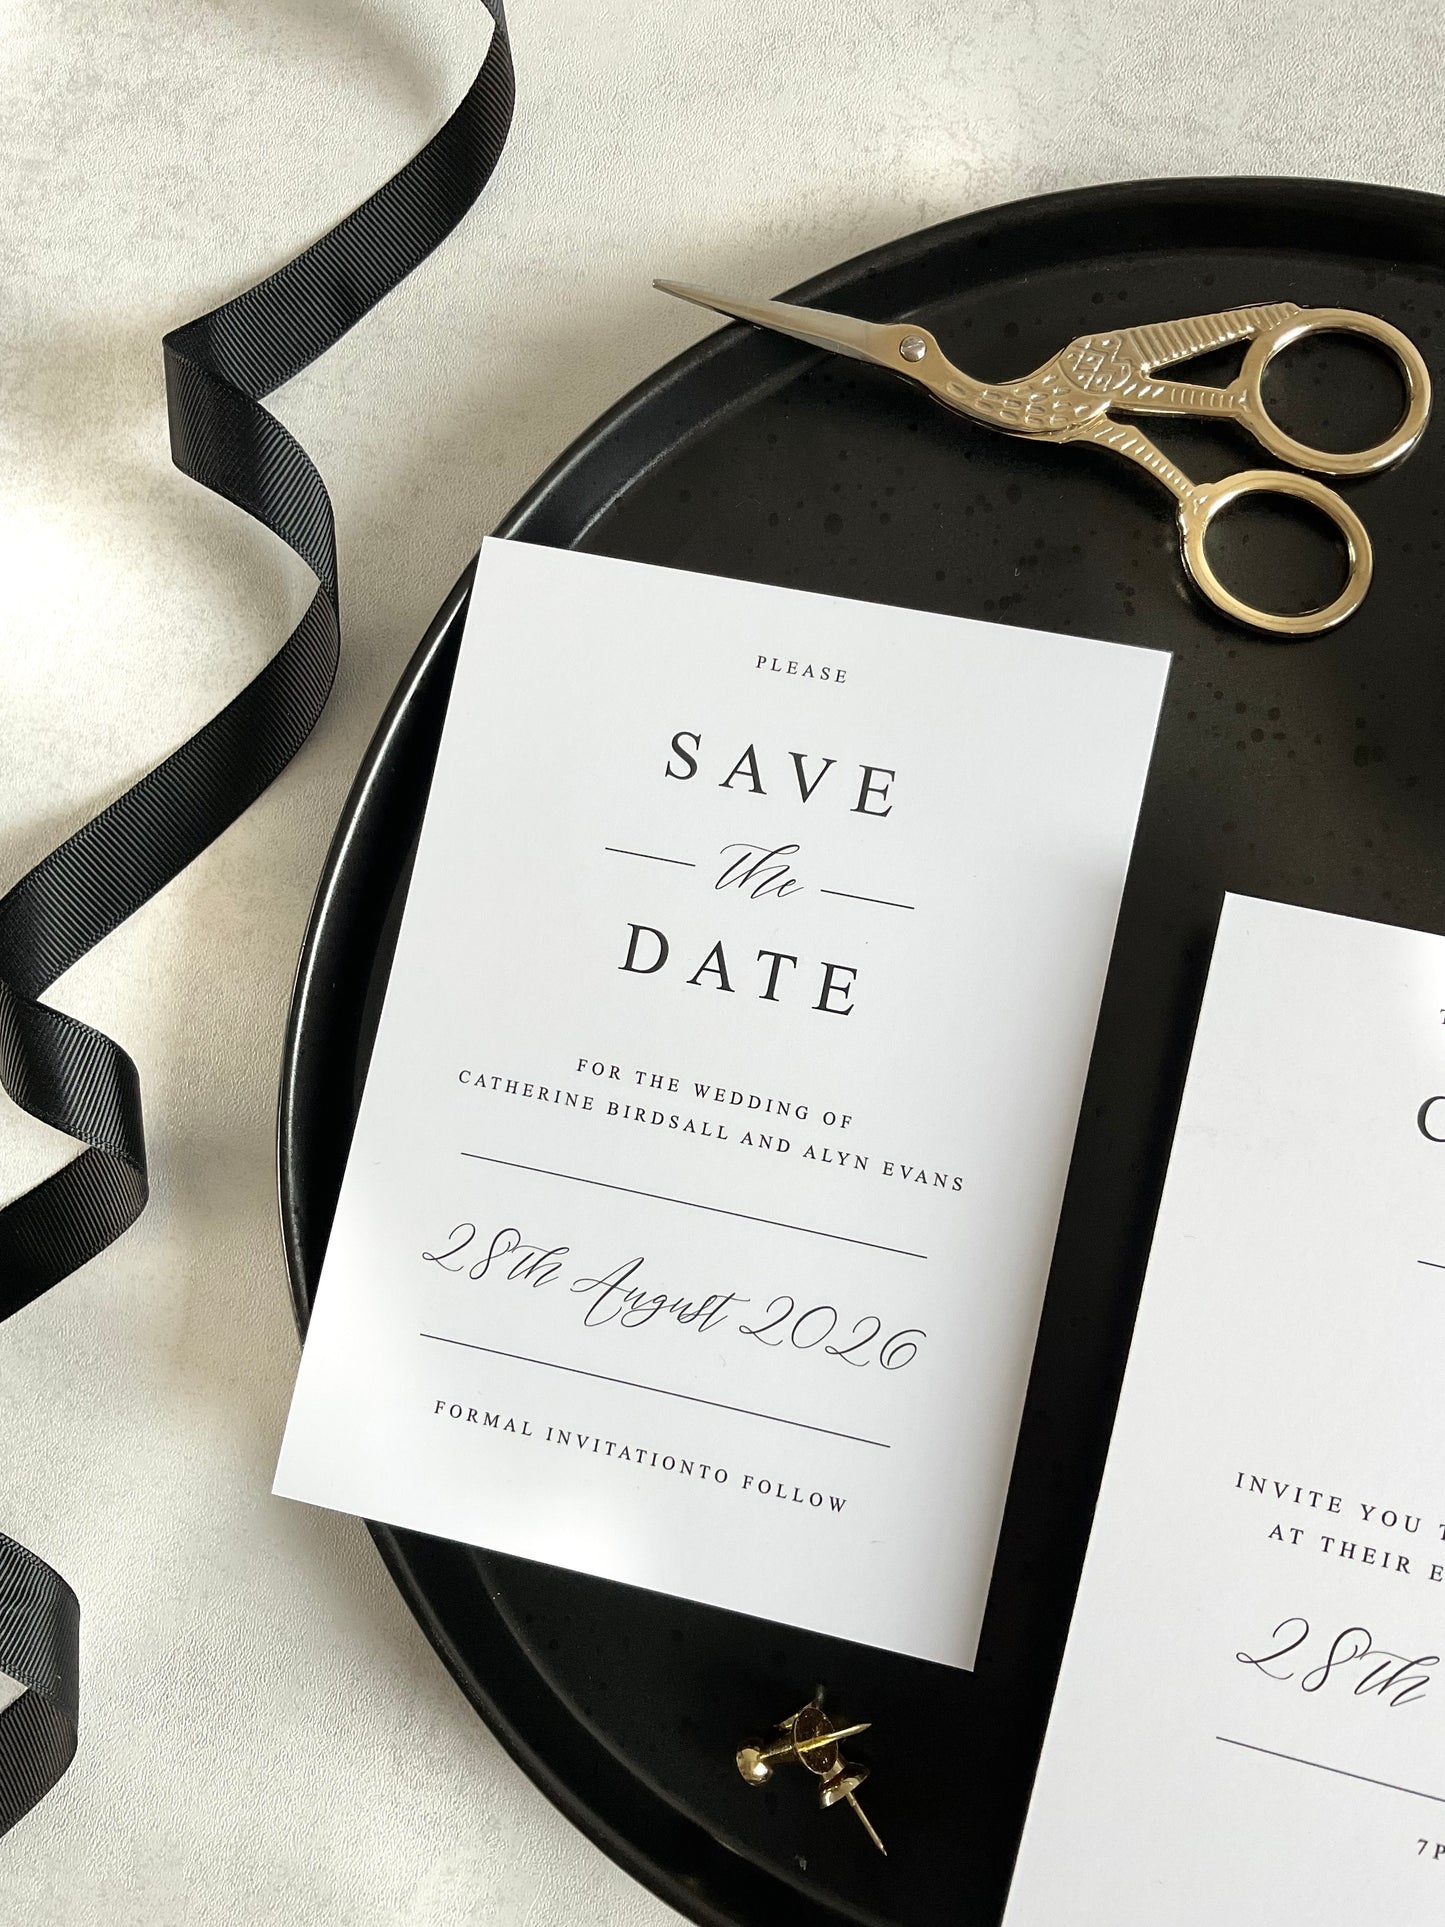 Catherine Save the Date card